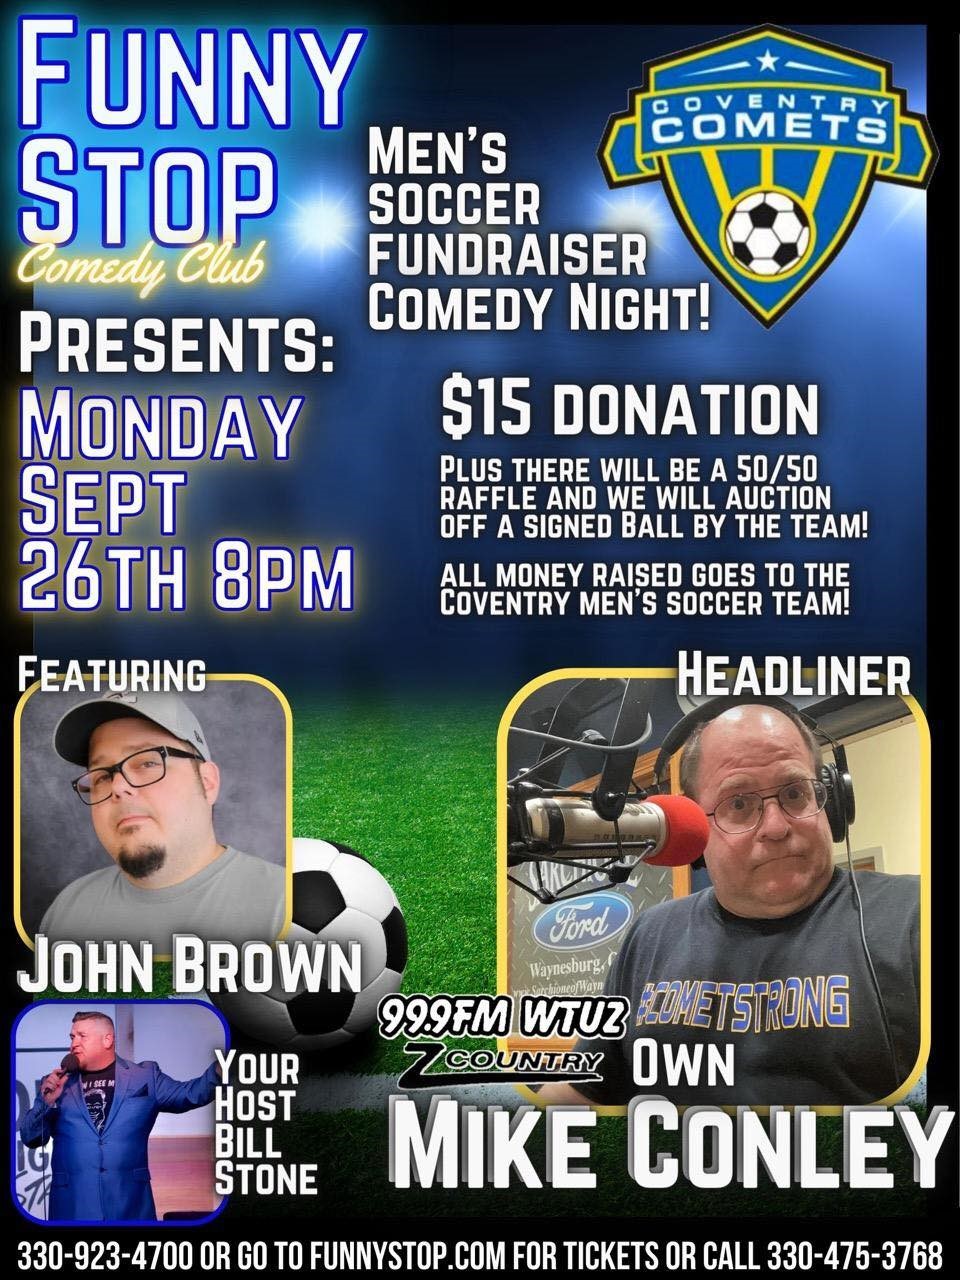 Men's Soccer Fundraiser Comedy Night! Mike Conley, Bill Stone, John Brown at Funny Stop Comedy Club on sep. 26, 20:00@Funny Stop Comedy Club - Buy tickets and Get information on Funny Stop funnystop.online